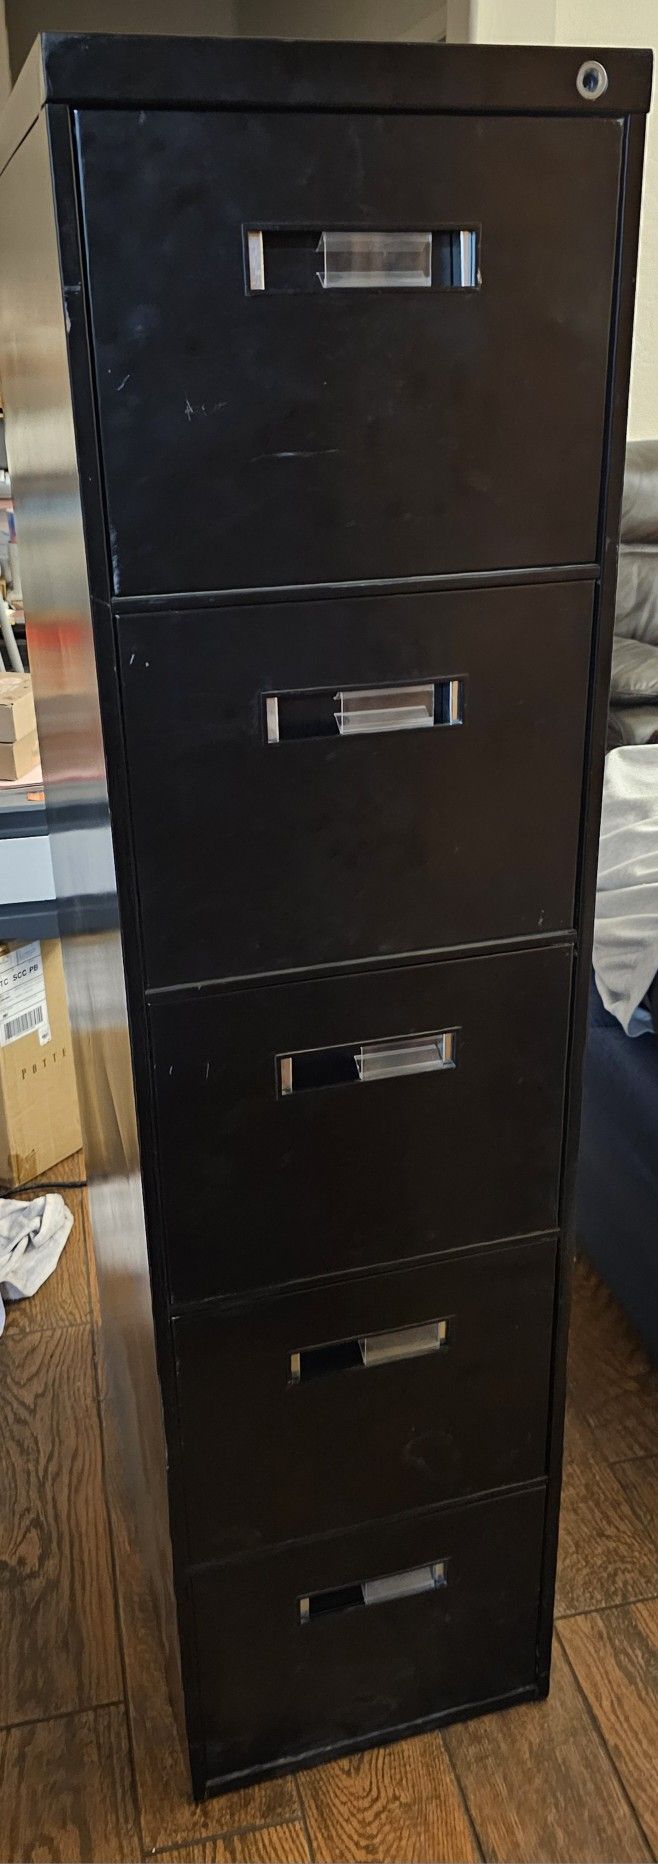 Black Filing Cabinet $15 OBO NEED GONE TODAY